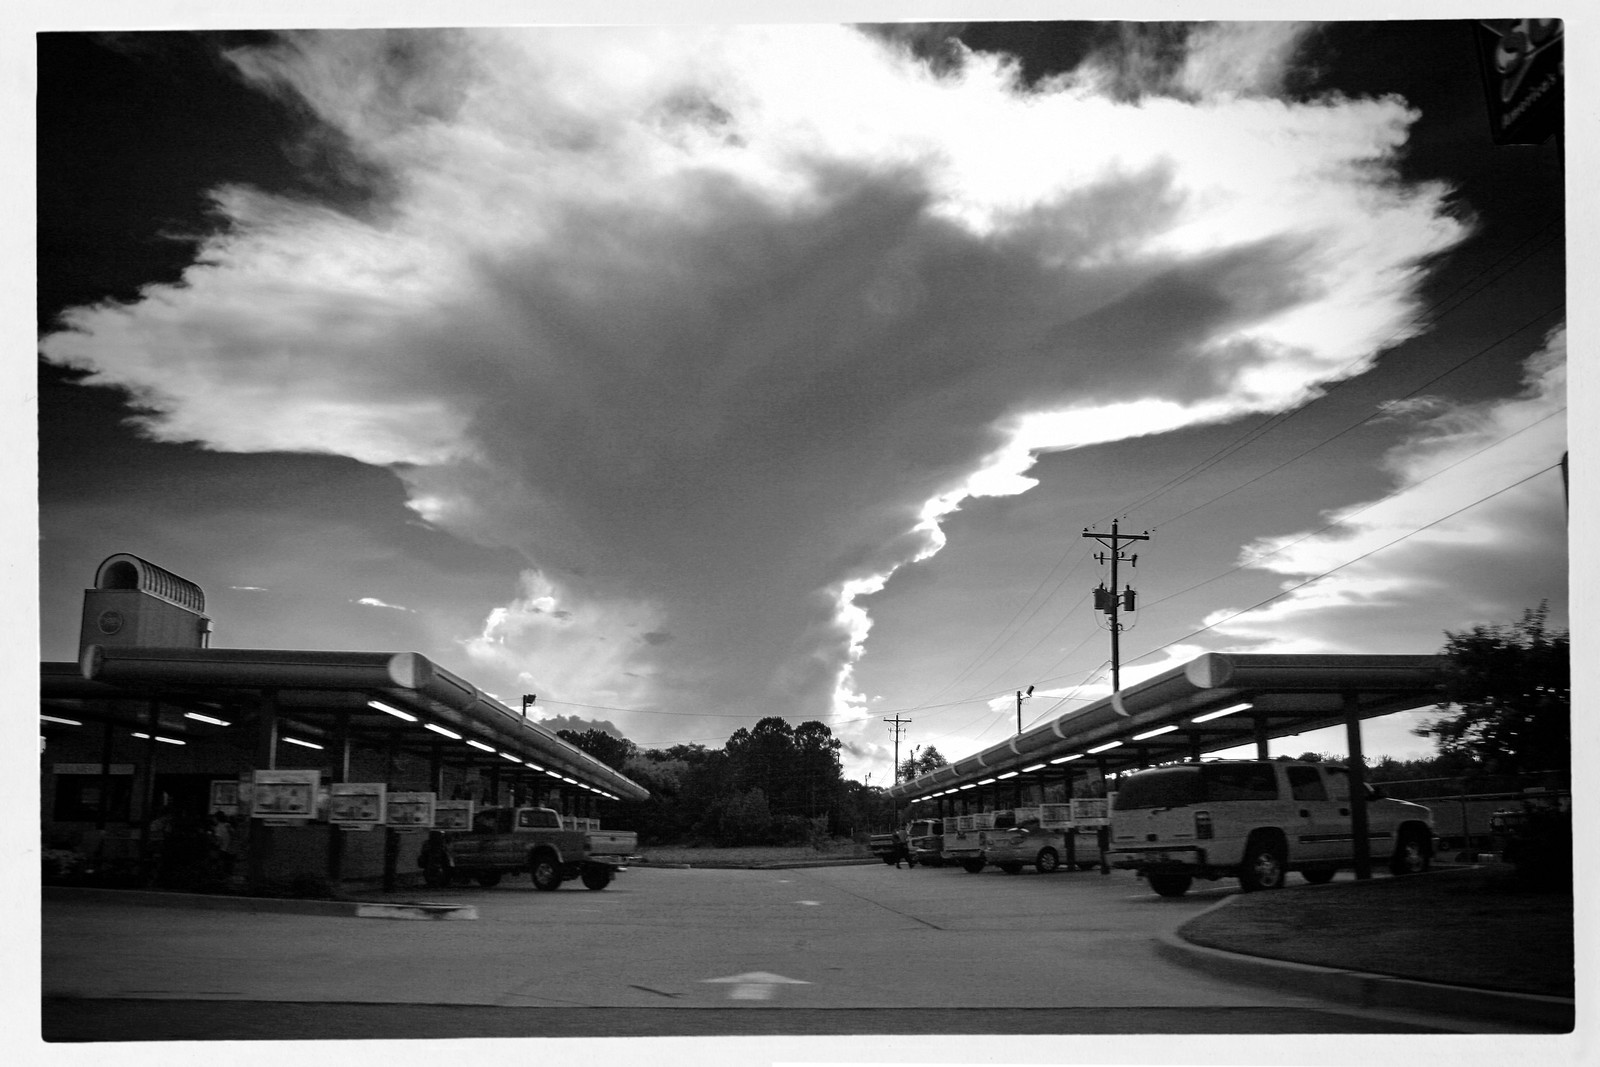 Outside Edgefield, Cloud and Drive-In, August 8, 2012